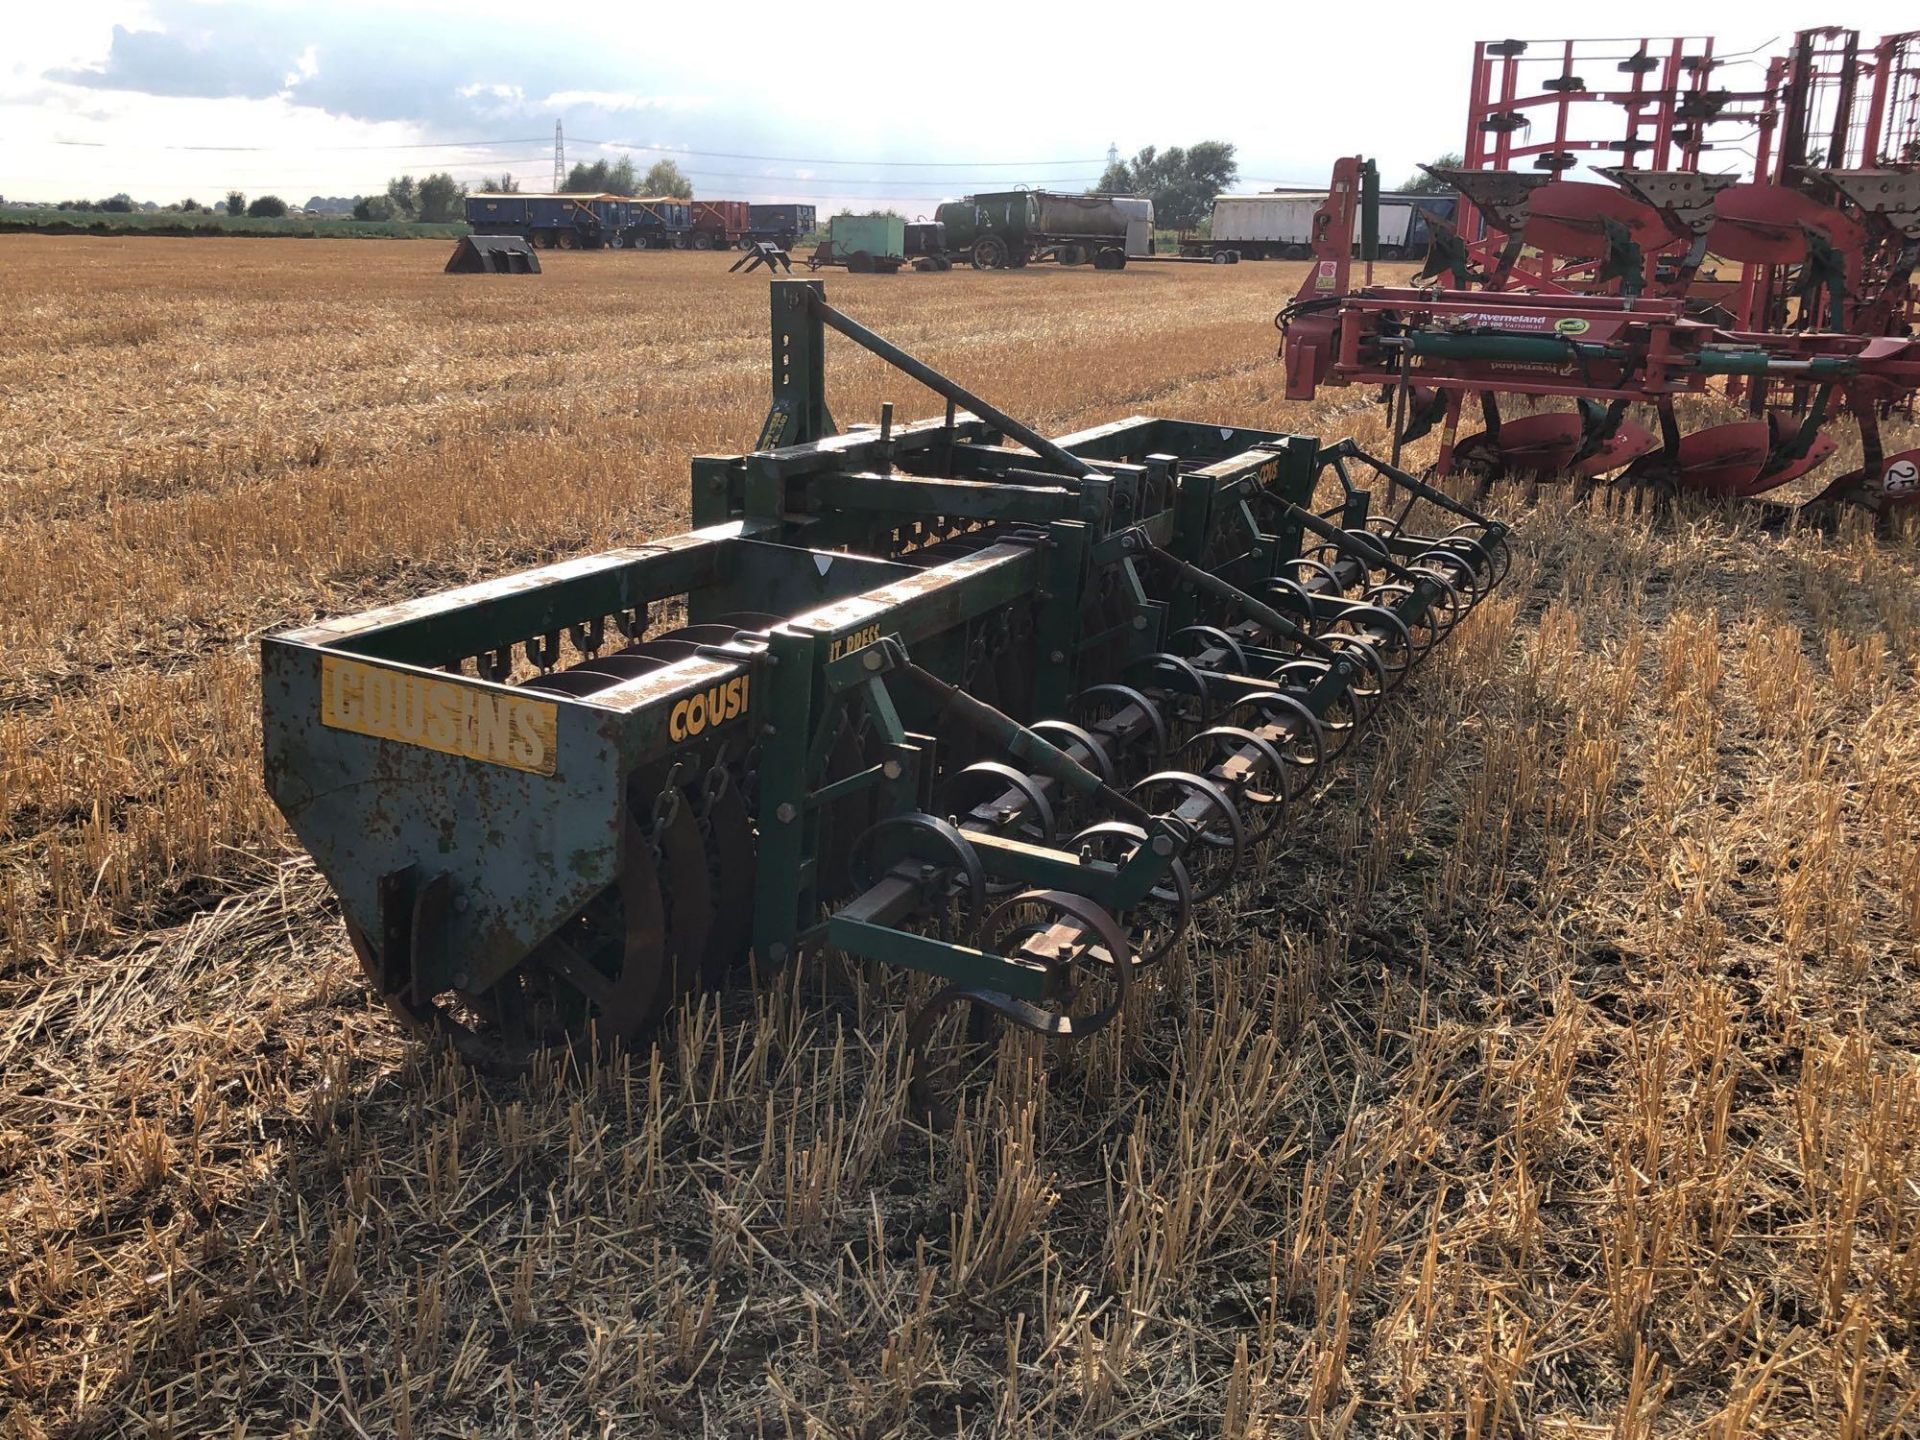 1995 Cousins 4.5m front press with springtines and press wheels. Serial No: 93474 - Image 4 of 8